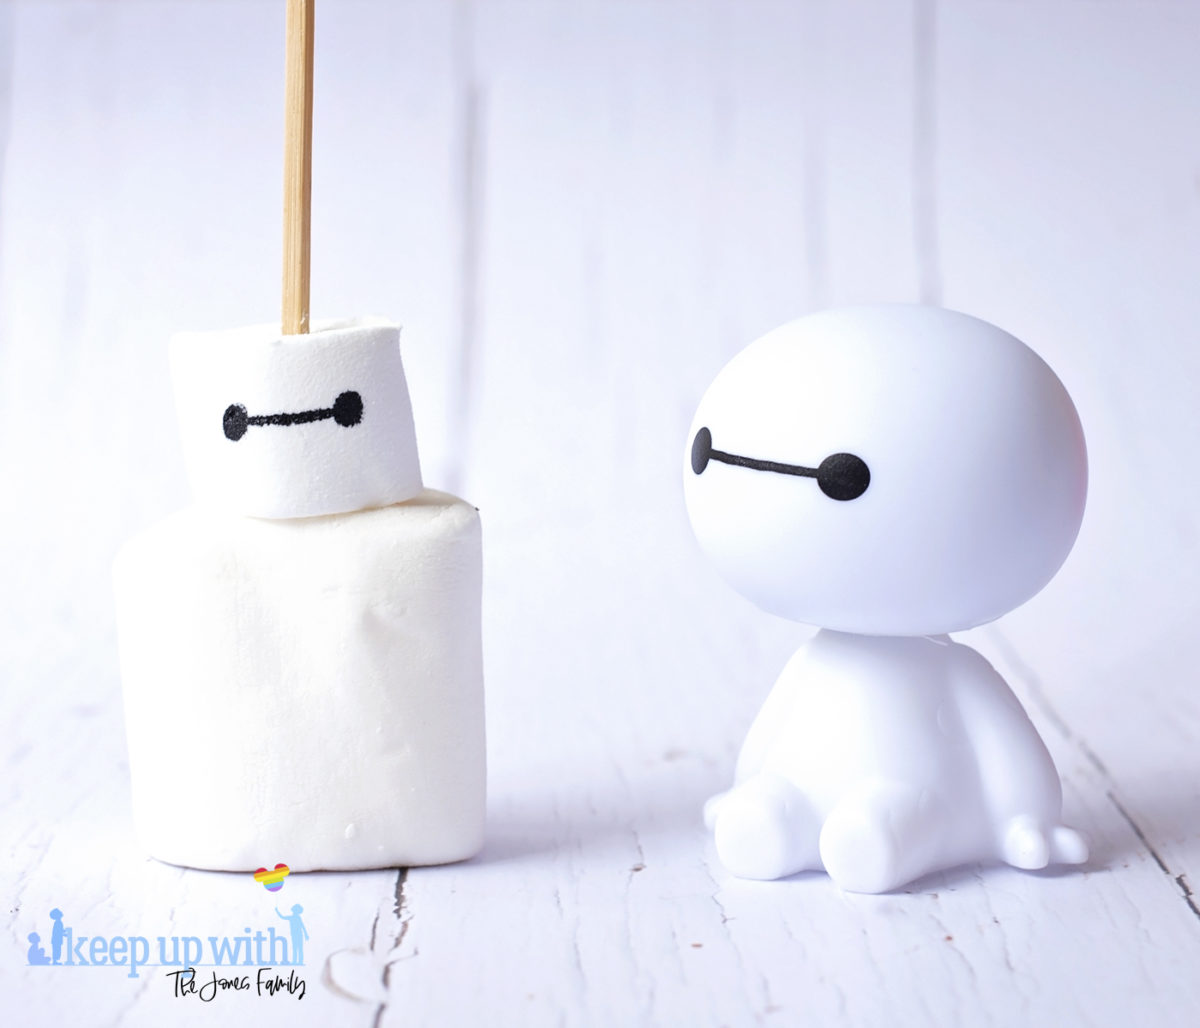 Image shows a plastic Baymax figure from Disney Pixar's Big Hero 6, and a Marshmallow Bayman Pop sat next to it on a white tabletop. Image by Keep Up With the Jones Family